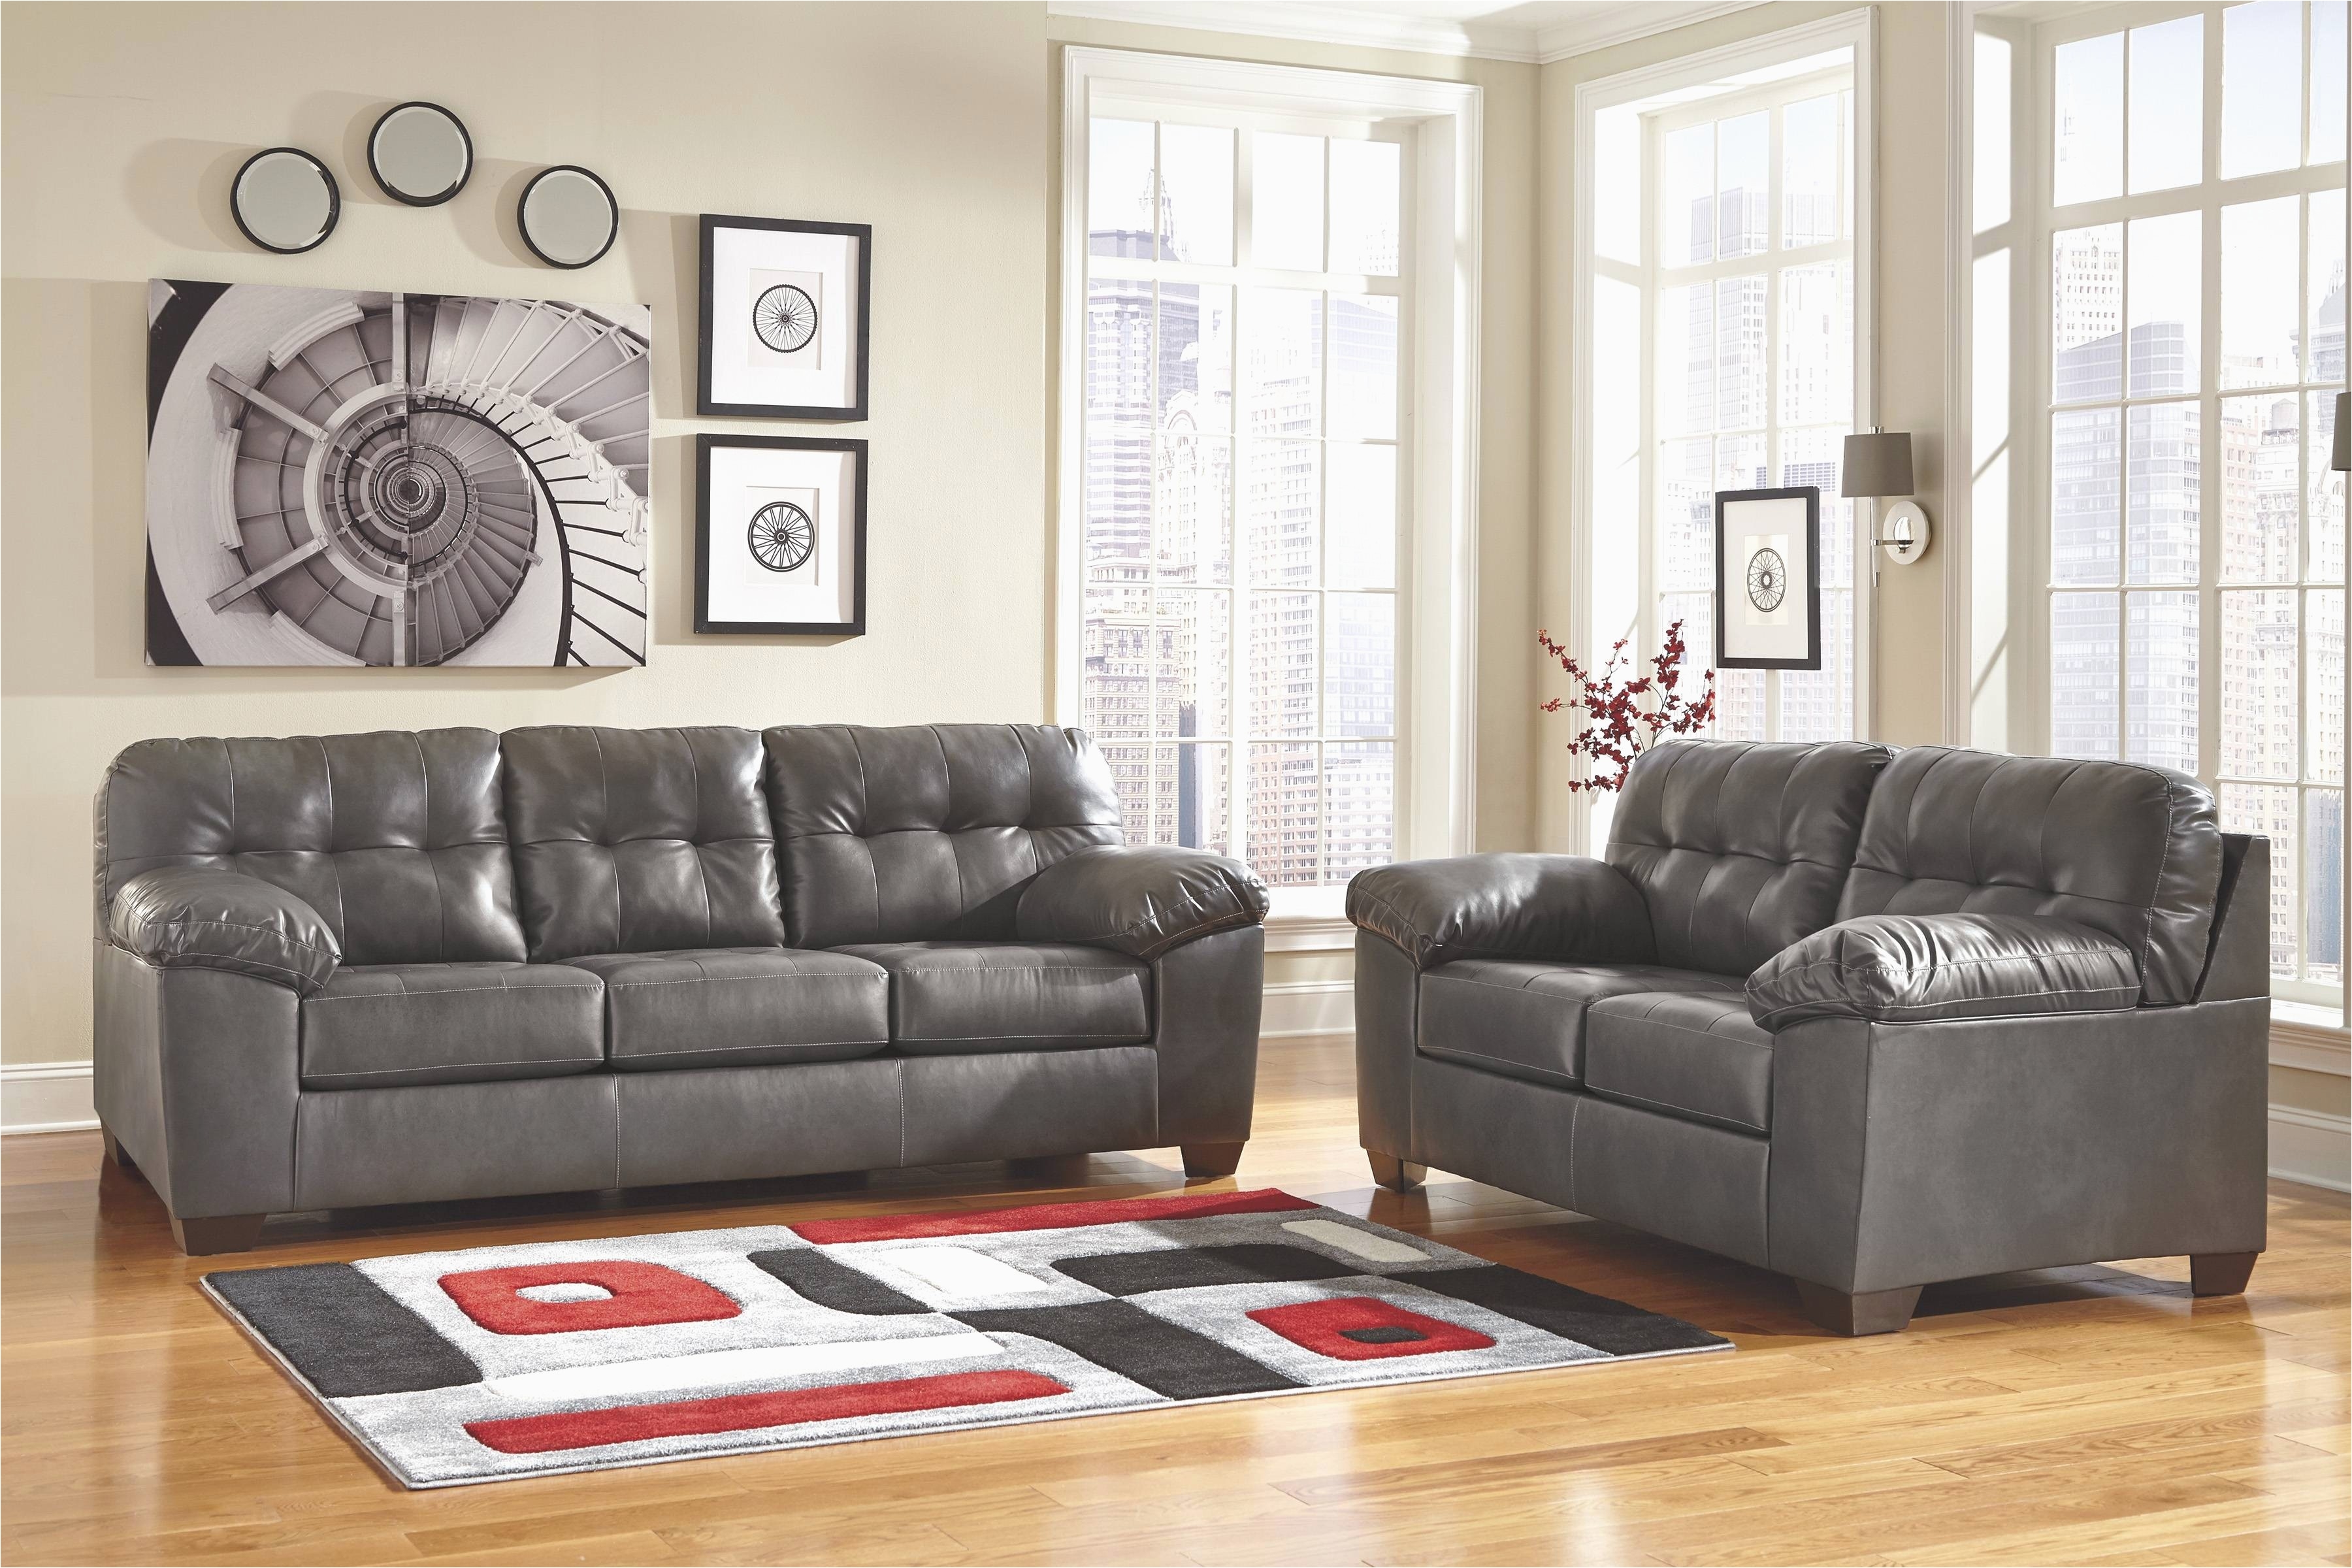 ashley furniture leather living room sets new leather sofa set for living room beautiful inspirational ashley